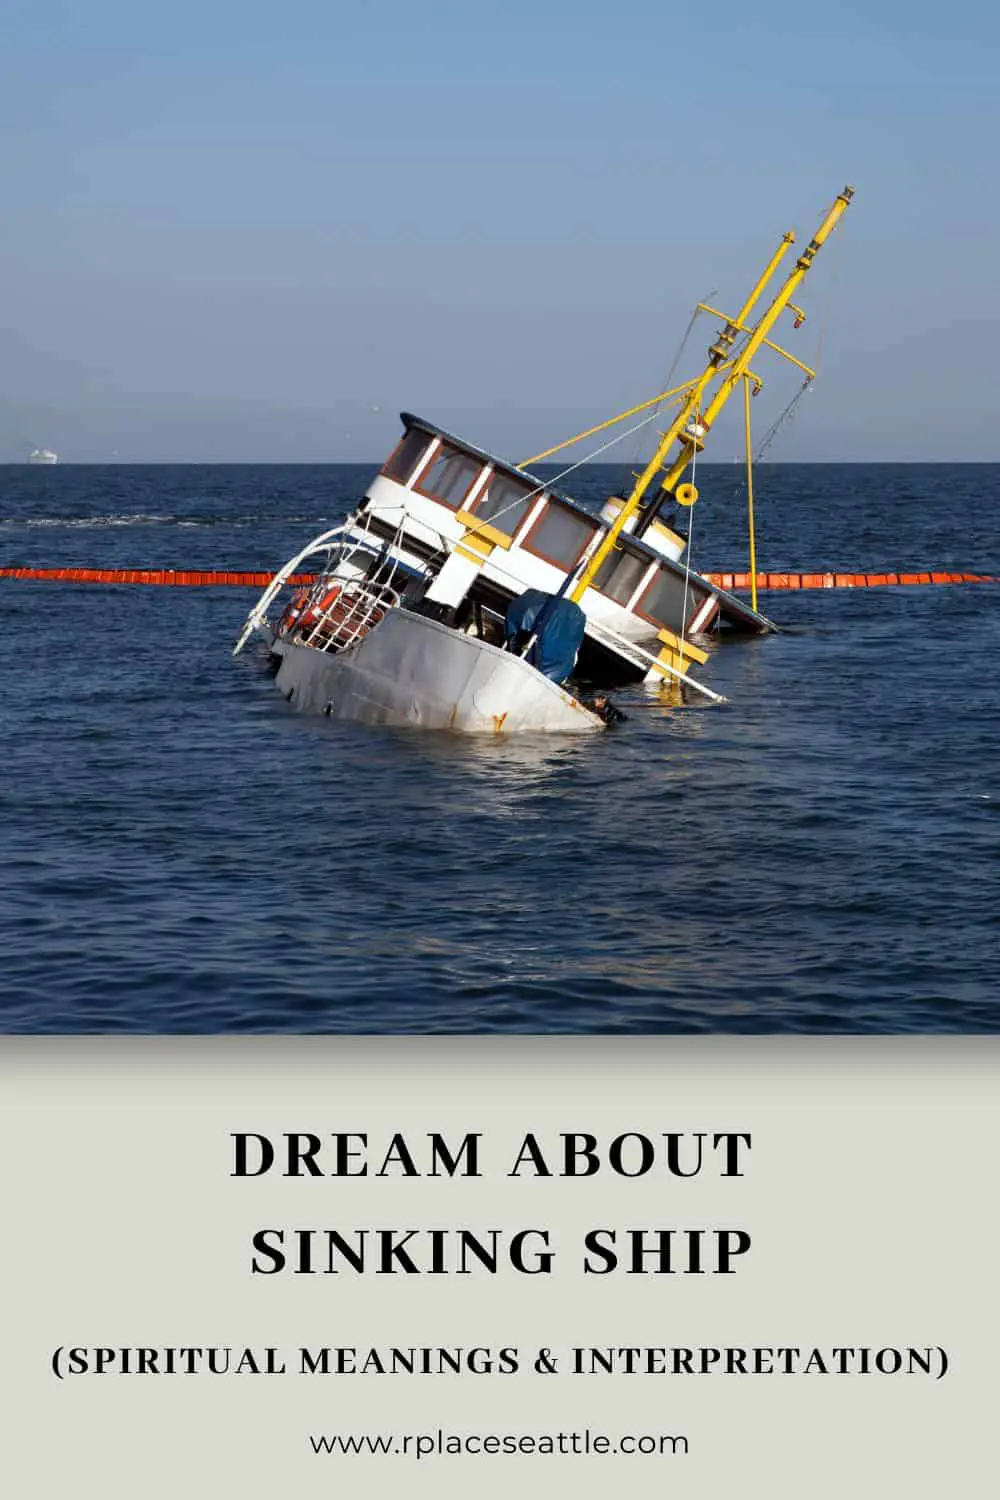 What Are The Psychological Meanings Of A Dream Of Boat Sinking?